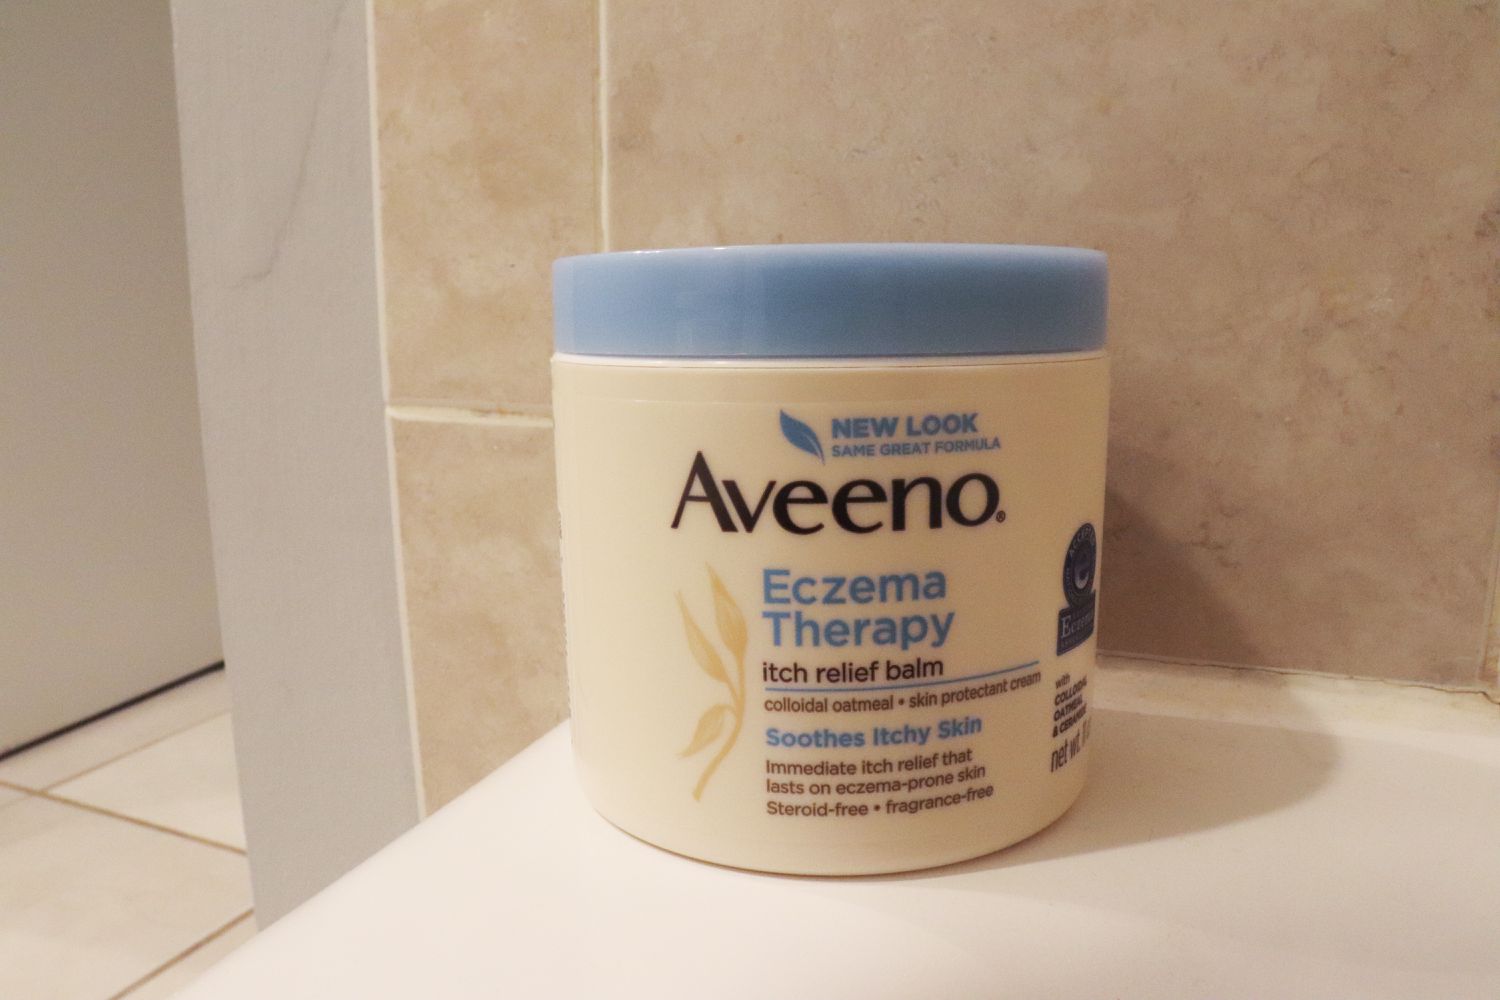 Aveeno Eczema Therapy Nighttime Itch Relief Balm displayed on the edge of a bathroom counter